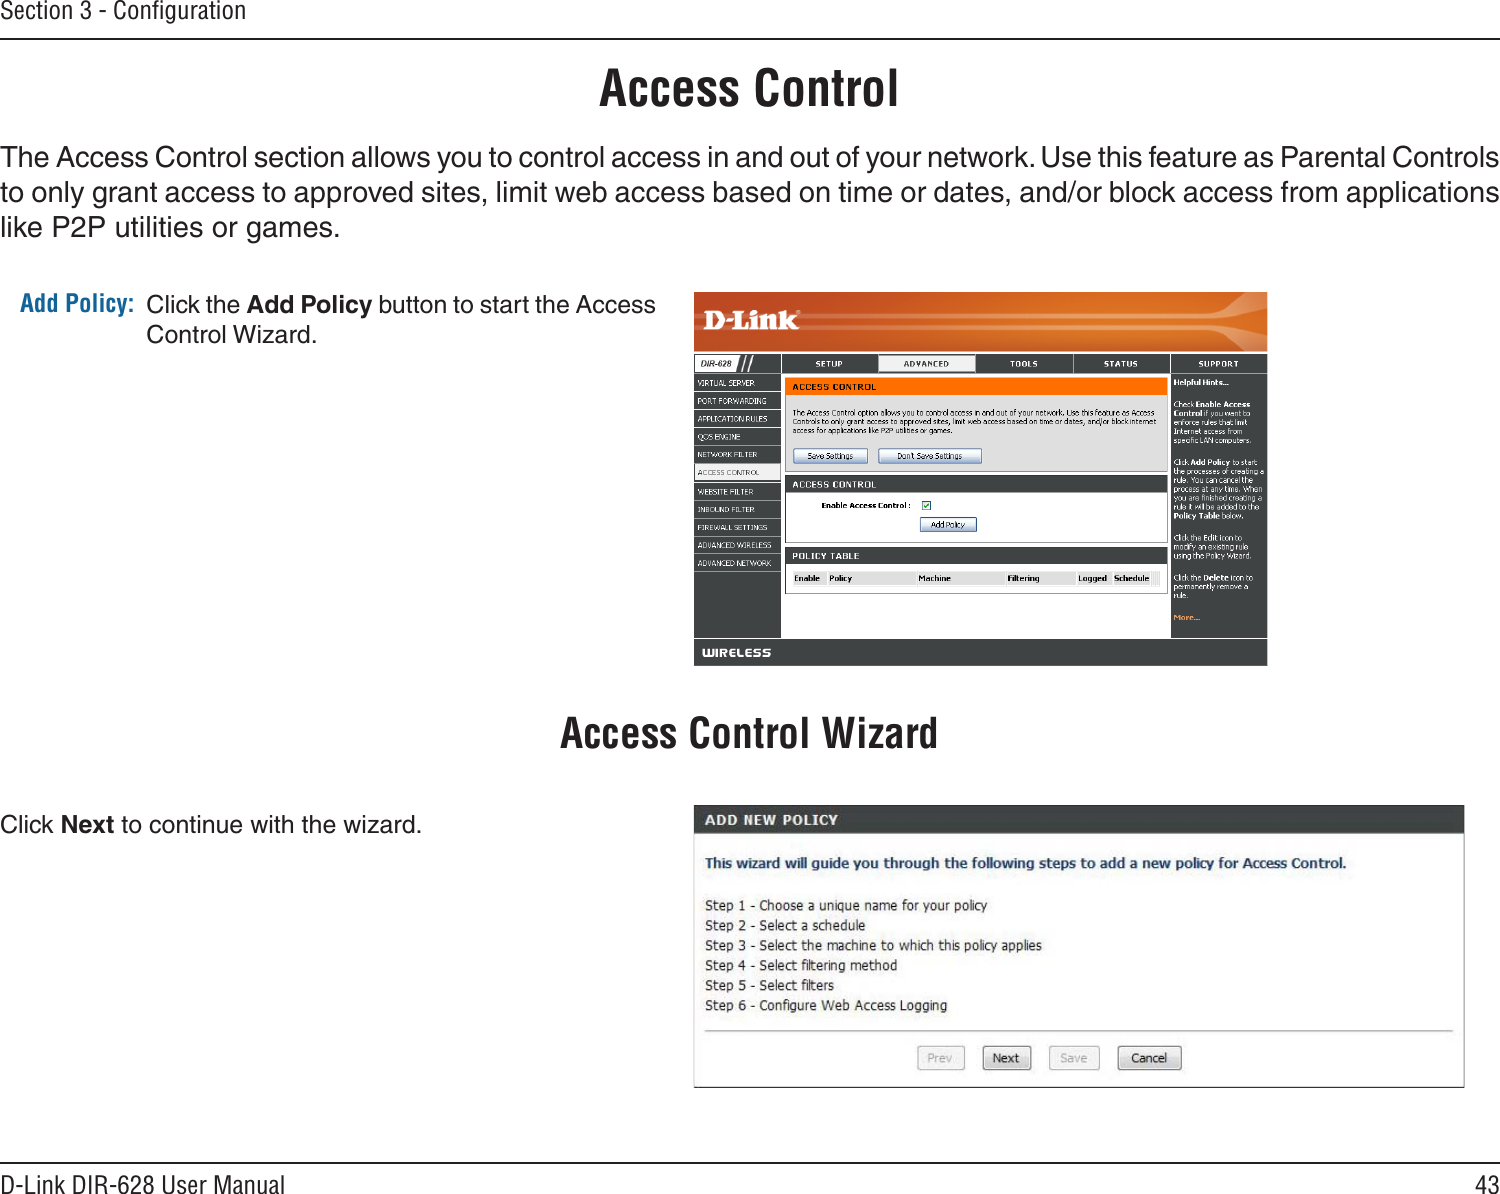 43D-Link DIR-628 User ManualSection 3 - ConﬁgurationAccess ControlClick the Add Policy button to start the Access Control Wizard. Add Policy:The Access Control section allows you to control access in and out of your network. Use this feature as Parental Controls to only grant access to approved sites, limit web access based on time or dates, and/or block access from applications like P2P utilities or games.Click Next to continue with the wizard.Access Control Wizard